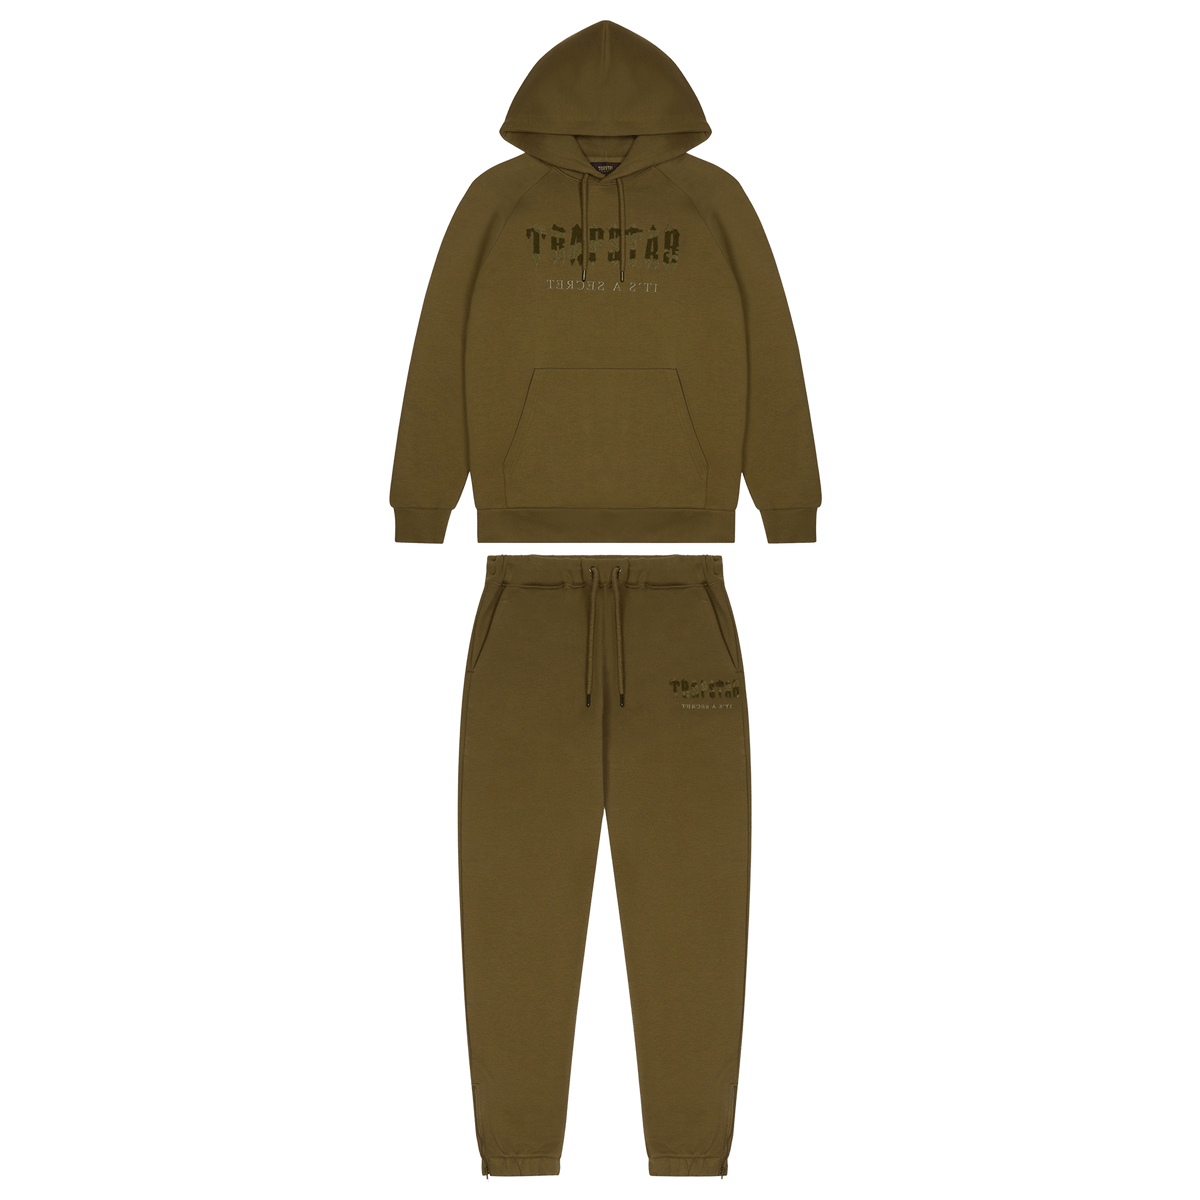 Trapstar Chenille Decoded Hooded Tracksuit-Olive Camo Military Edition - JuzsportsShops